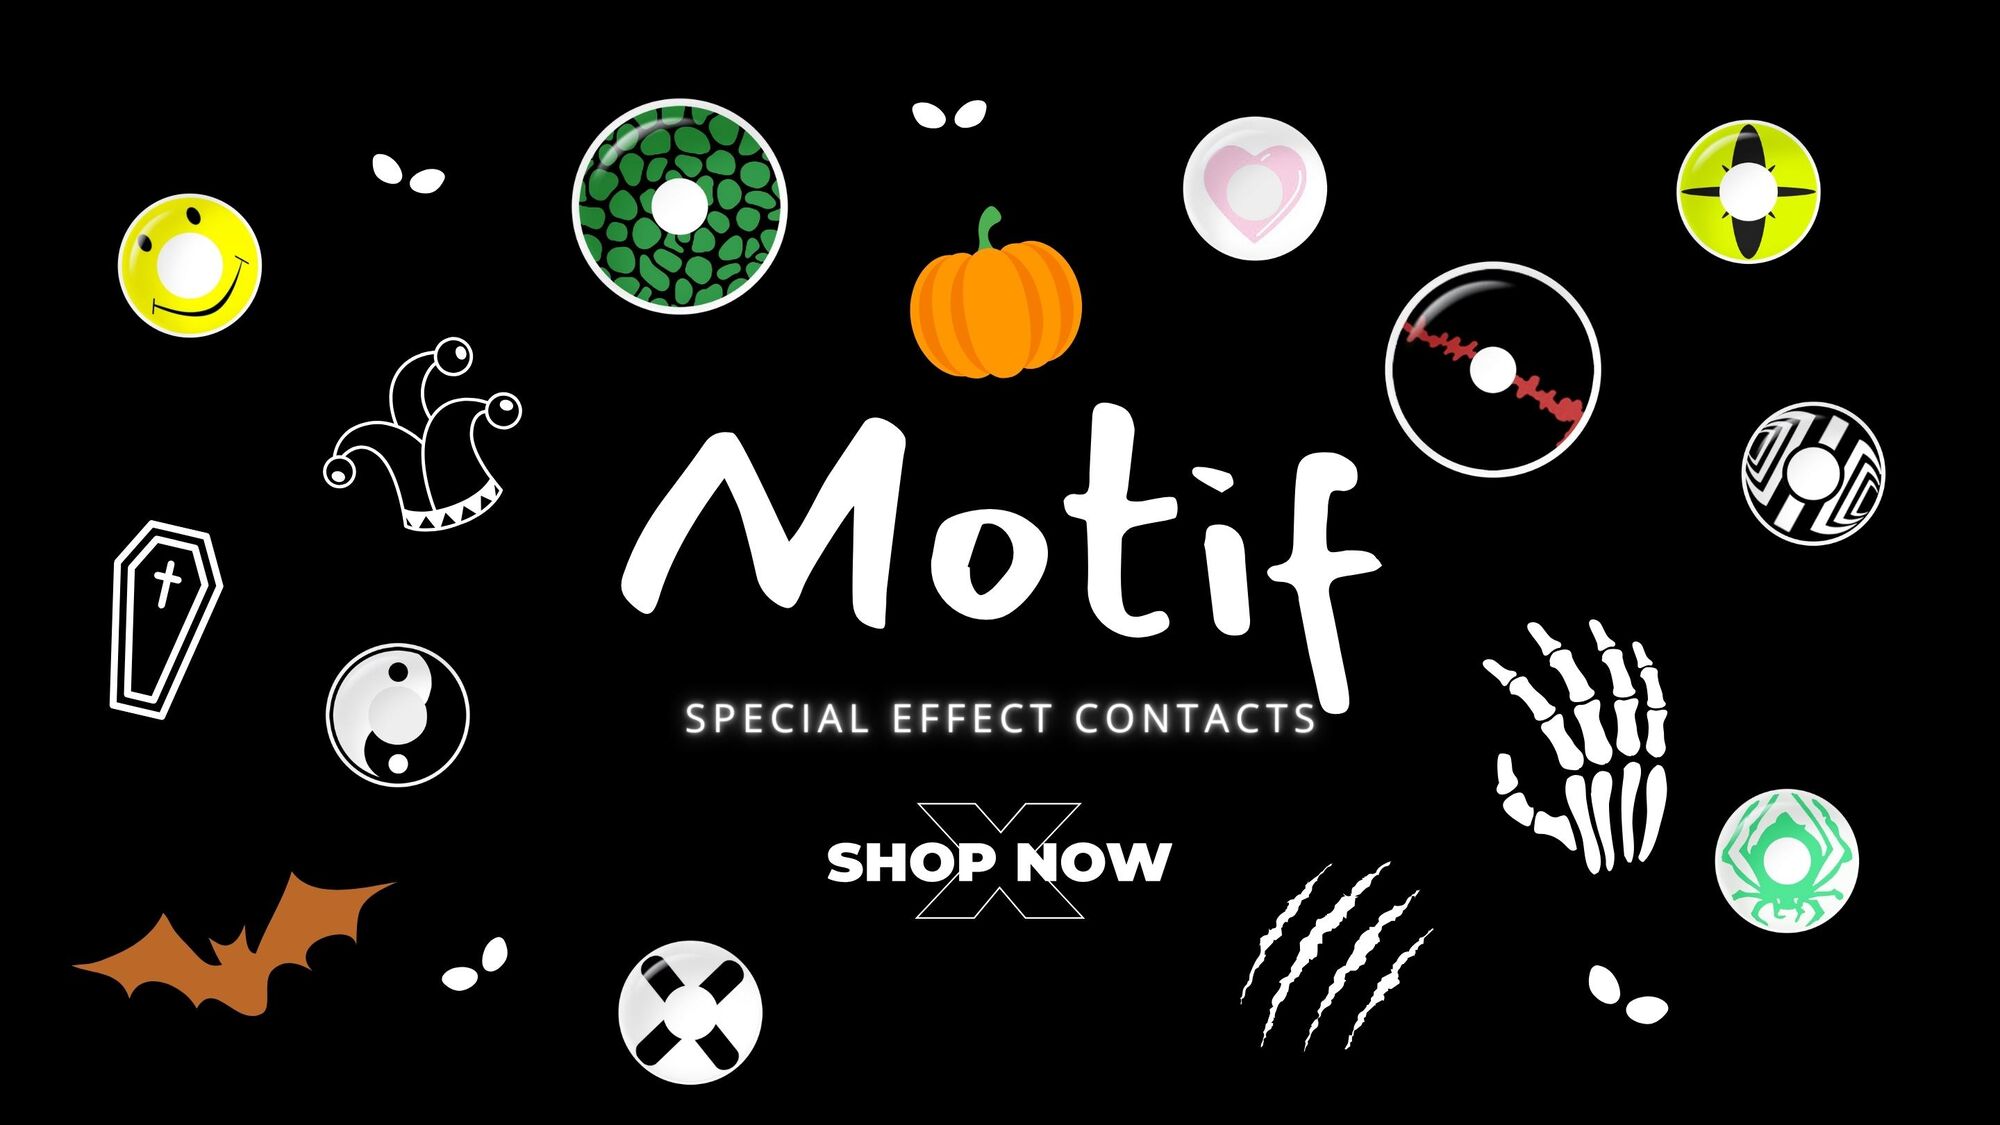 Motif Special Effect Contacts